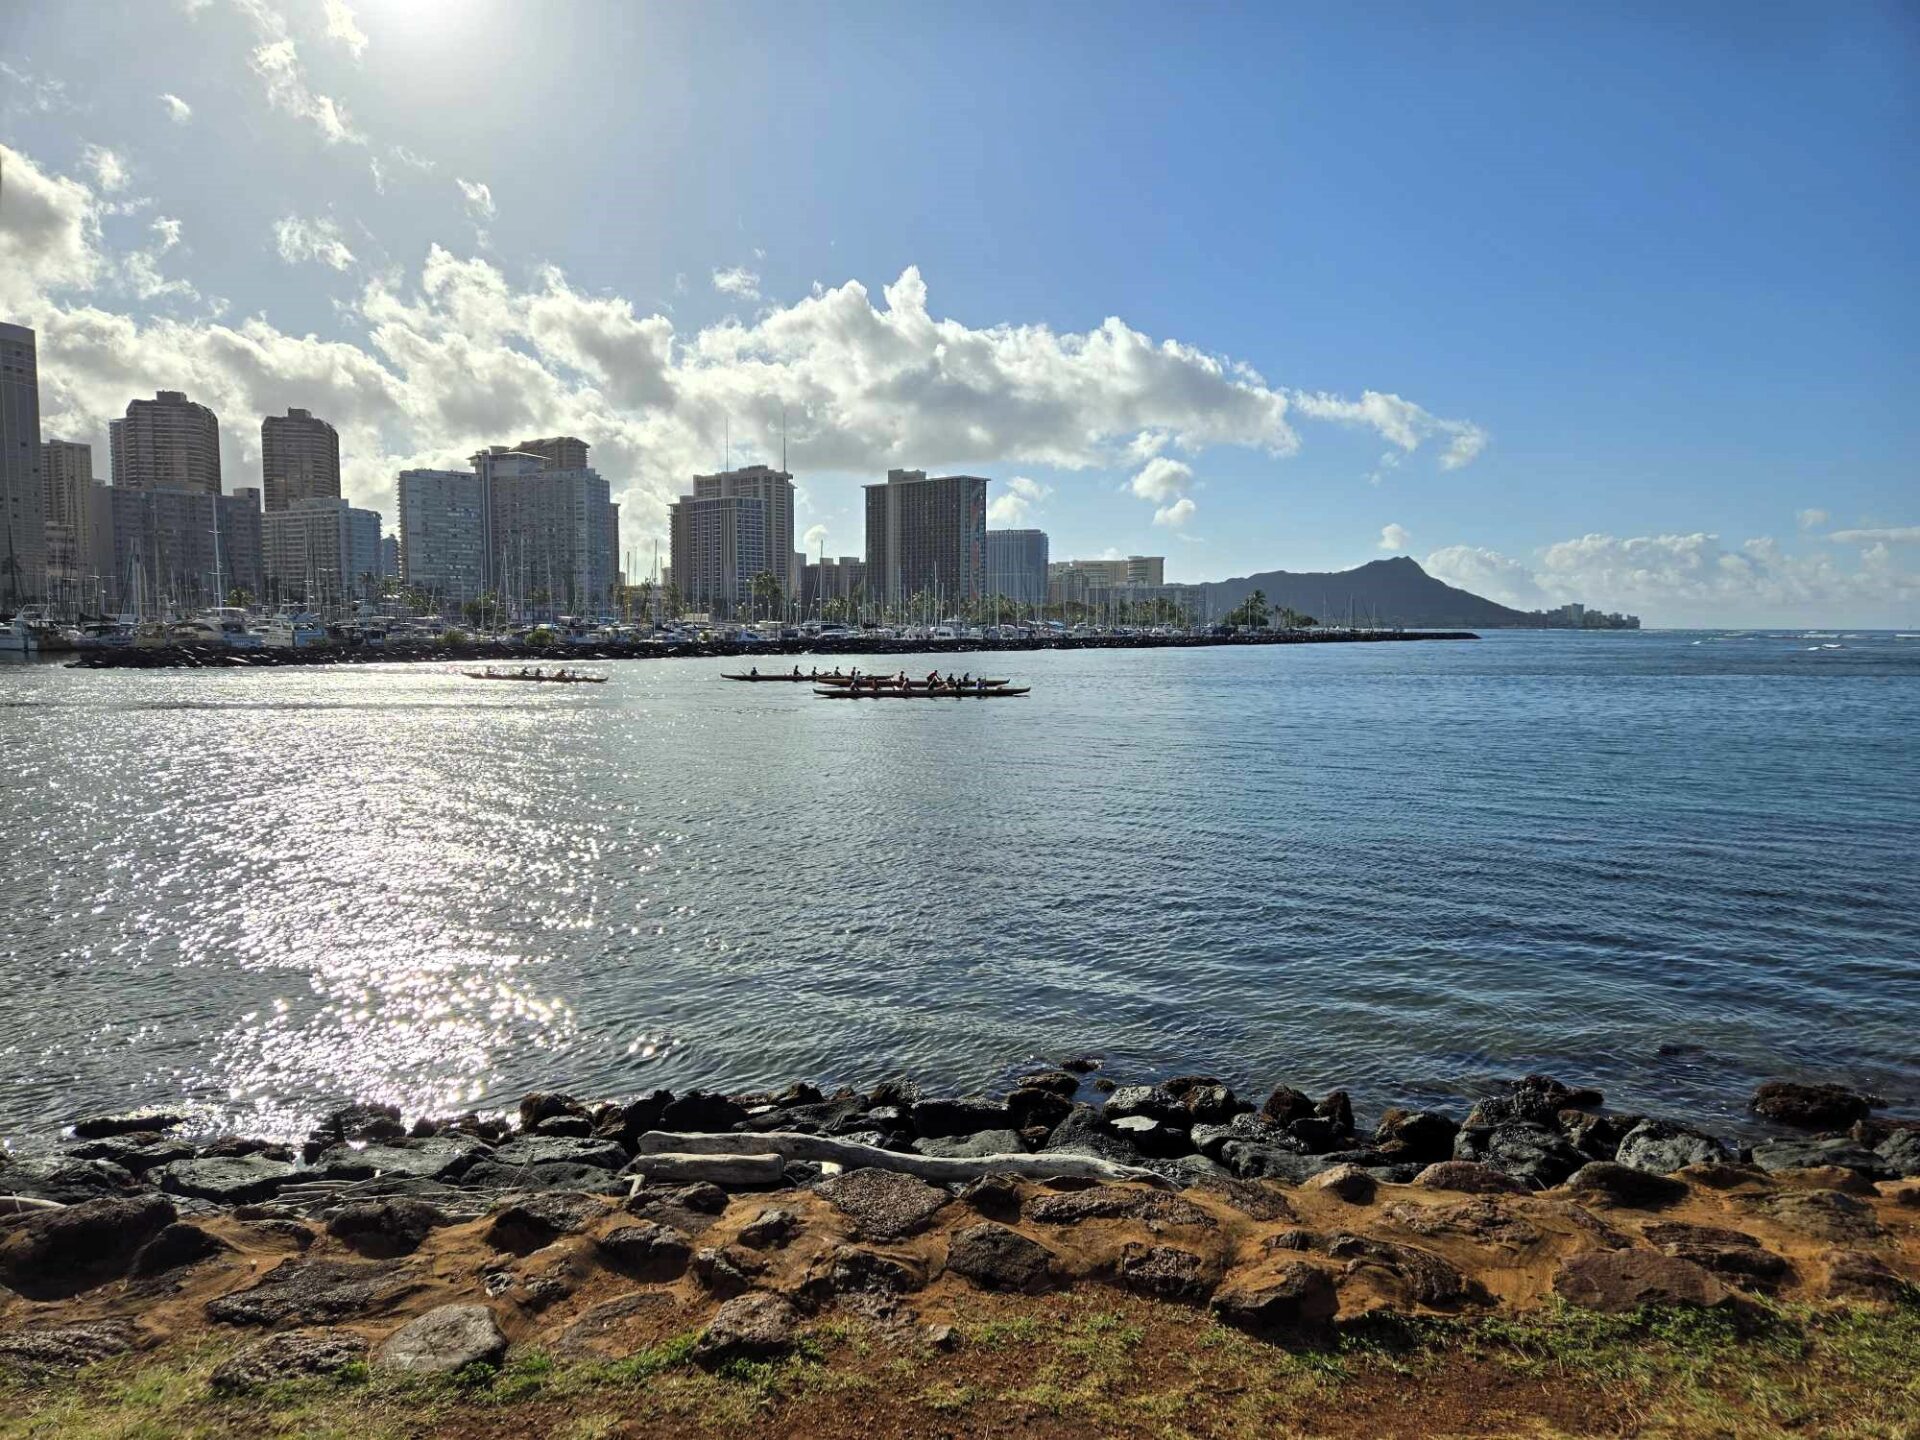 View of Waikiki seen from Magic Island during the Earth Day cleanup